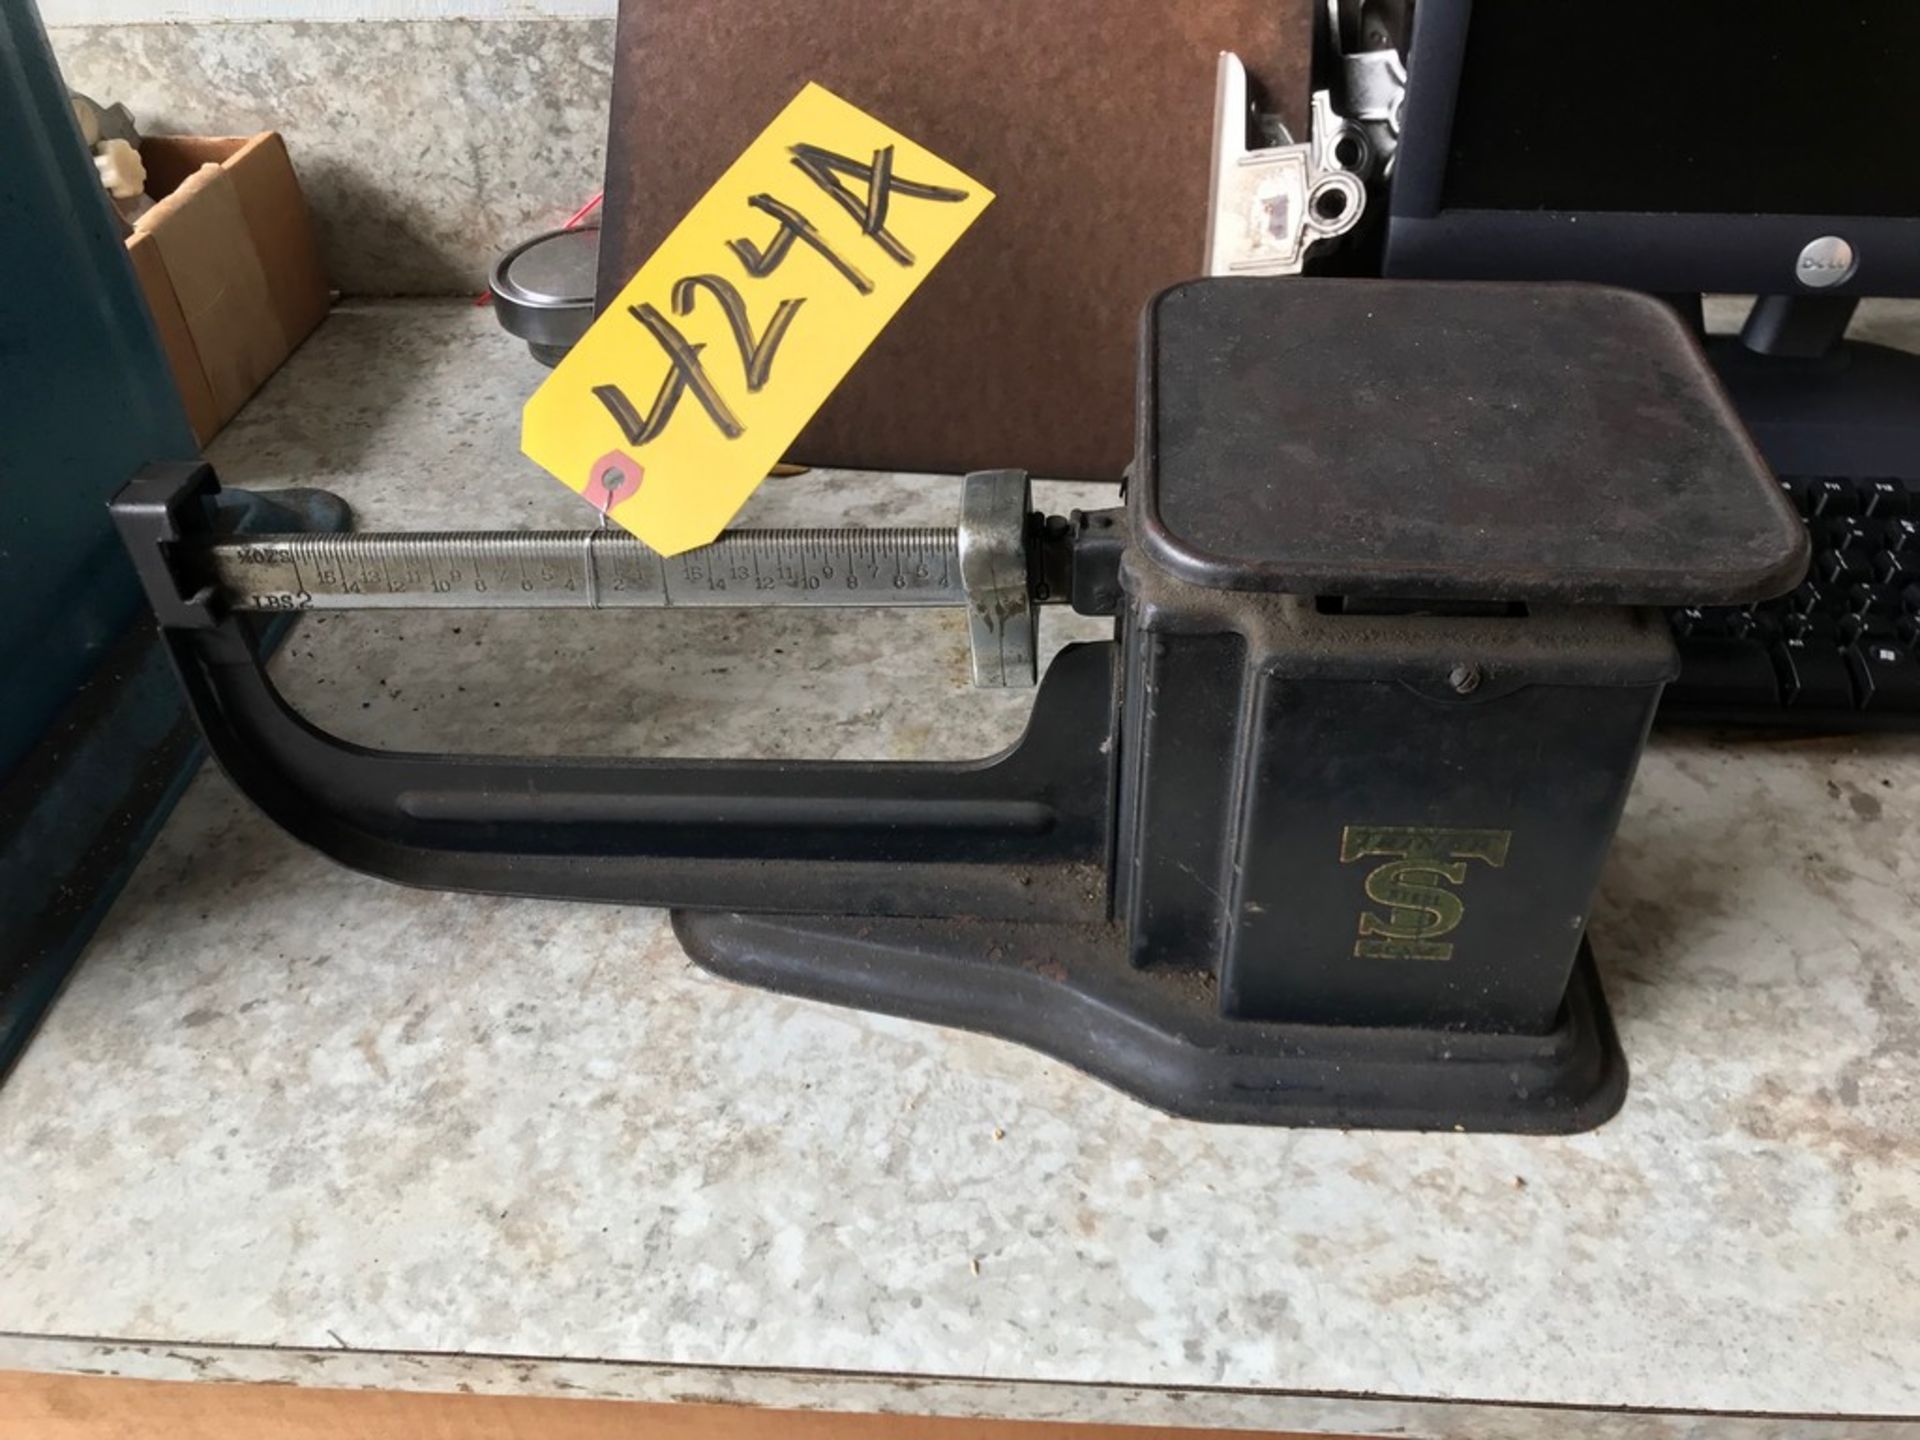 TRINER 2 LB SHIPPING SCALE - Image 2 of 2